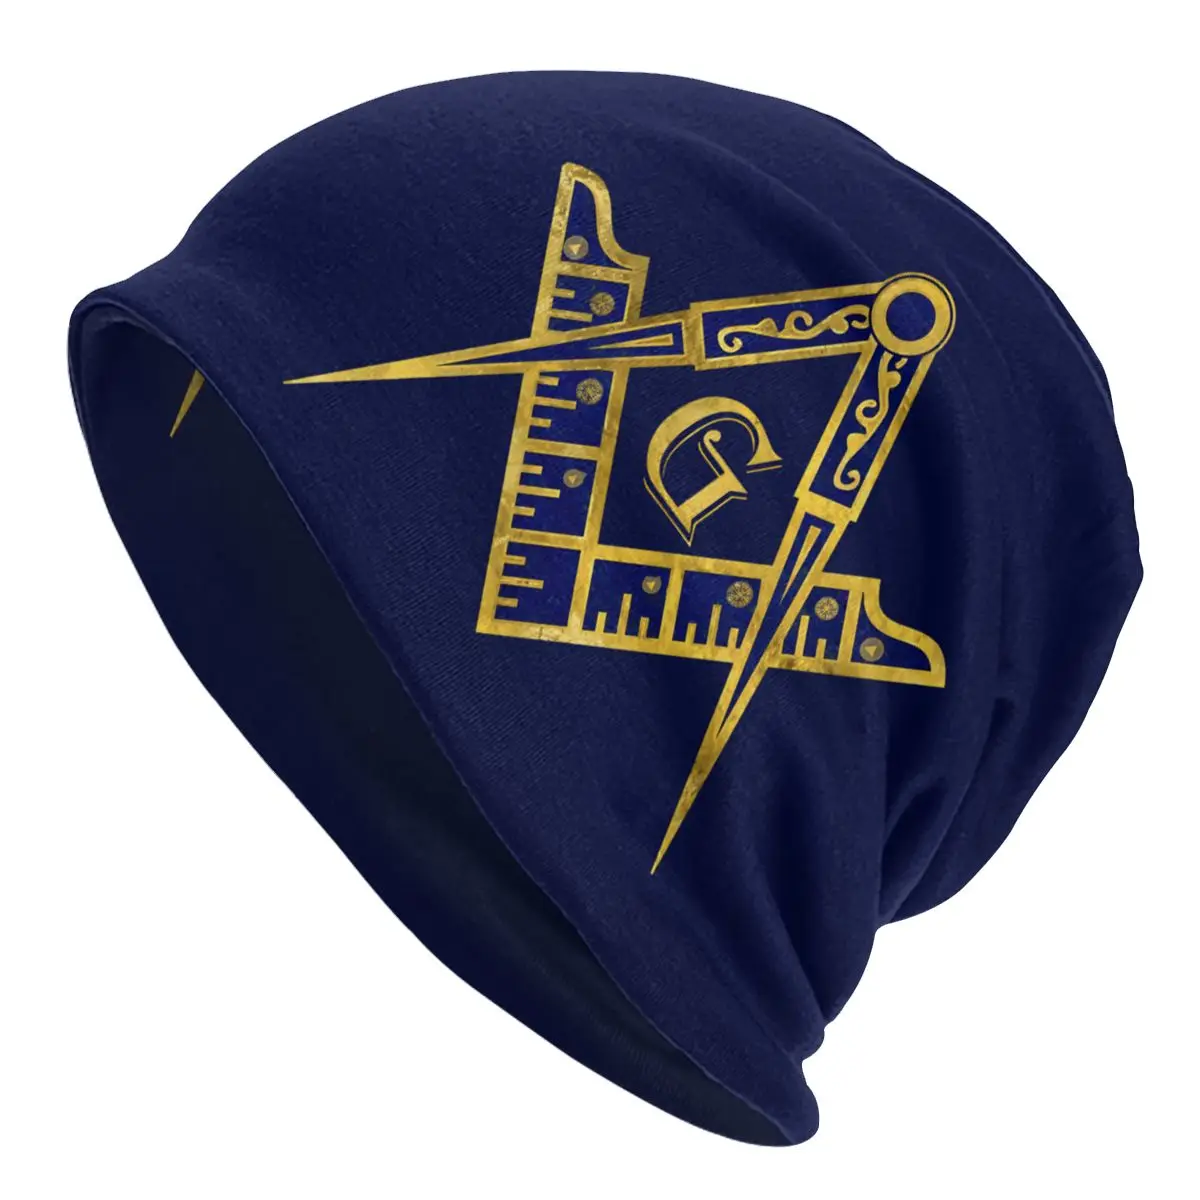 

Nevy Gold Freemason Gold Square Compass Women's Beanies Printed Chemotherapy Pile Outdoor Turban Breathable